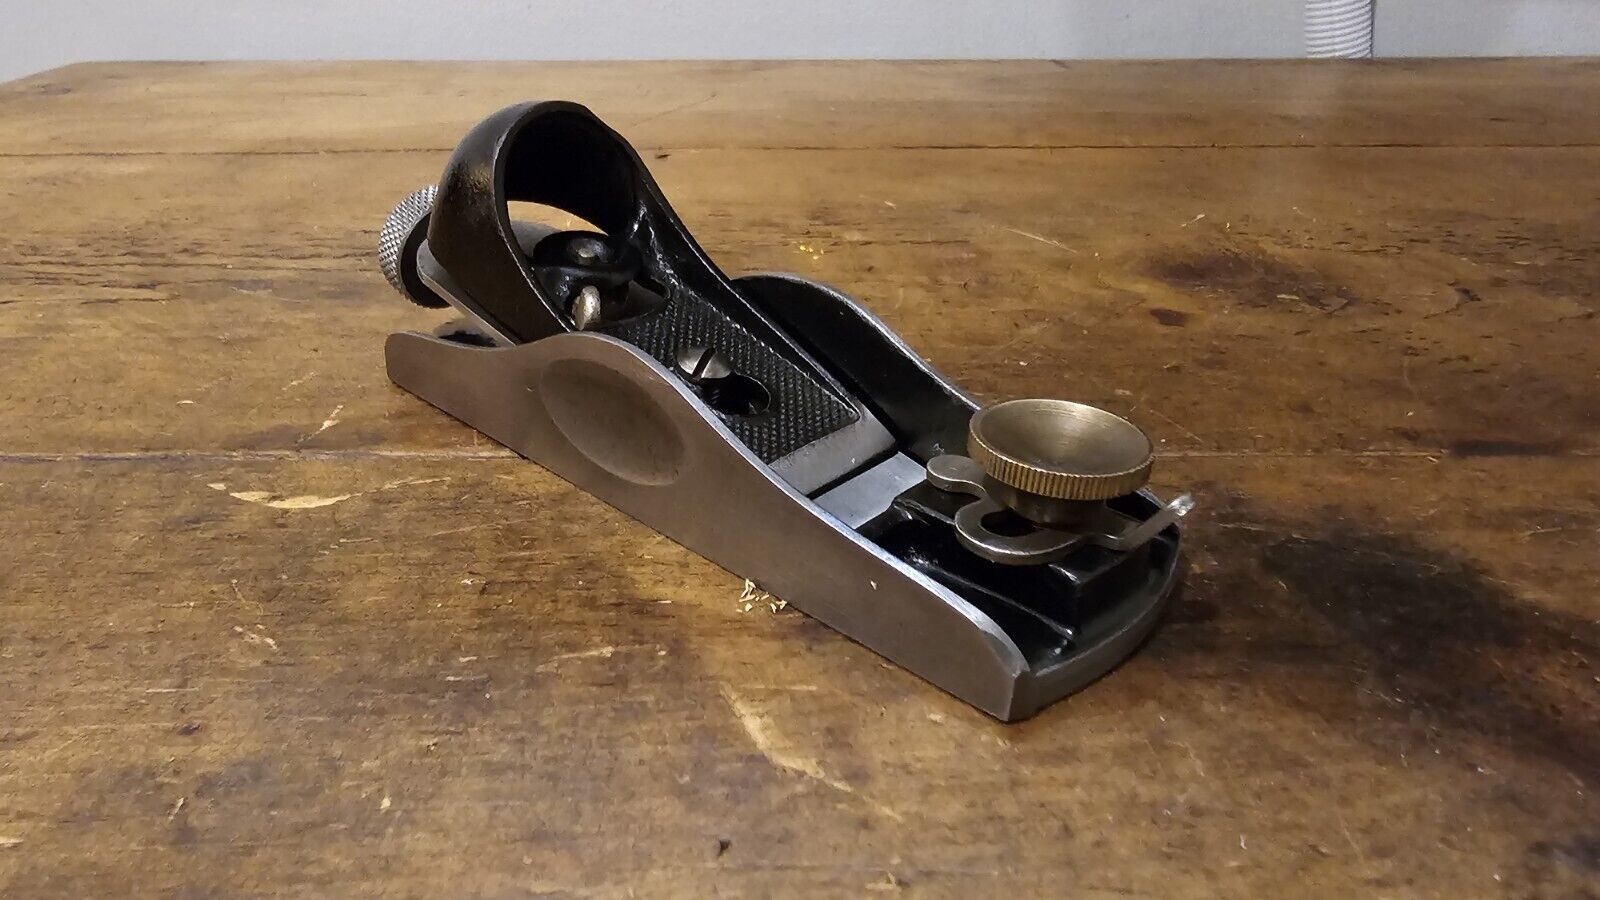 Stanley 60 1/2 Low angle Block Plane. Made in England